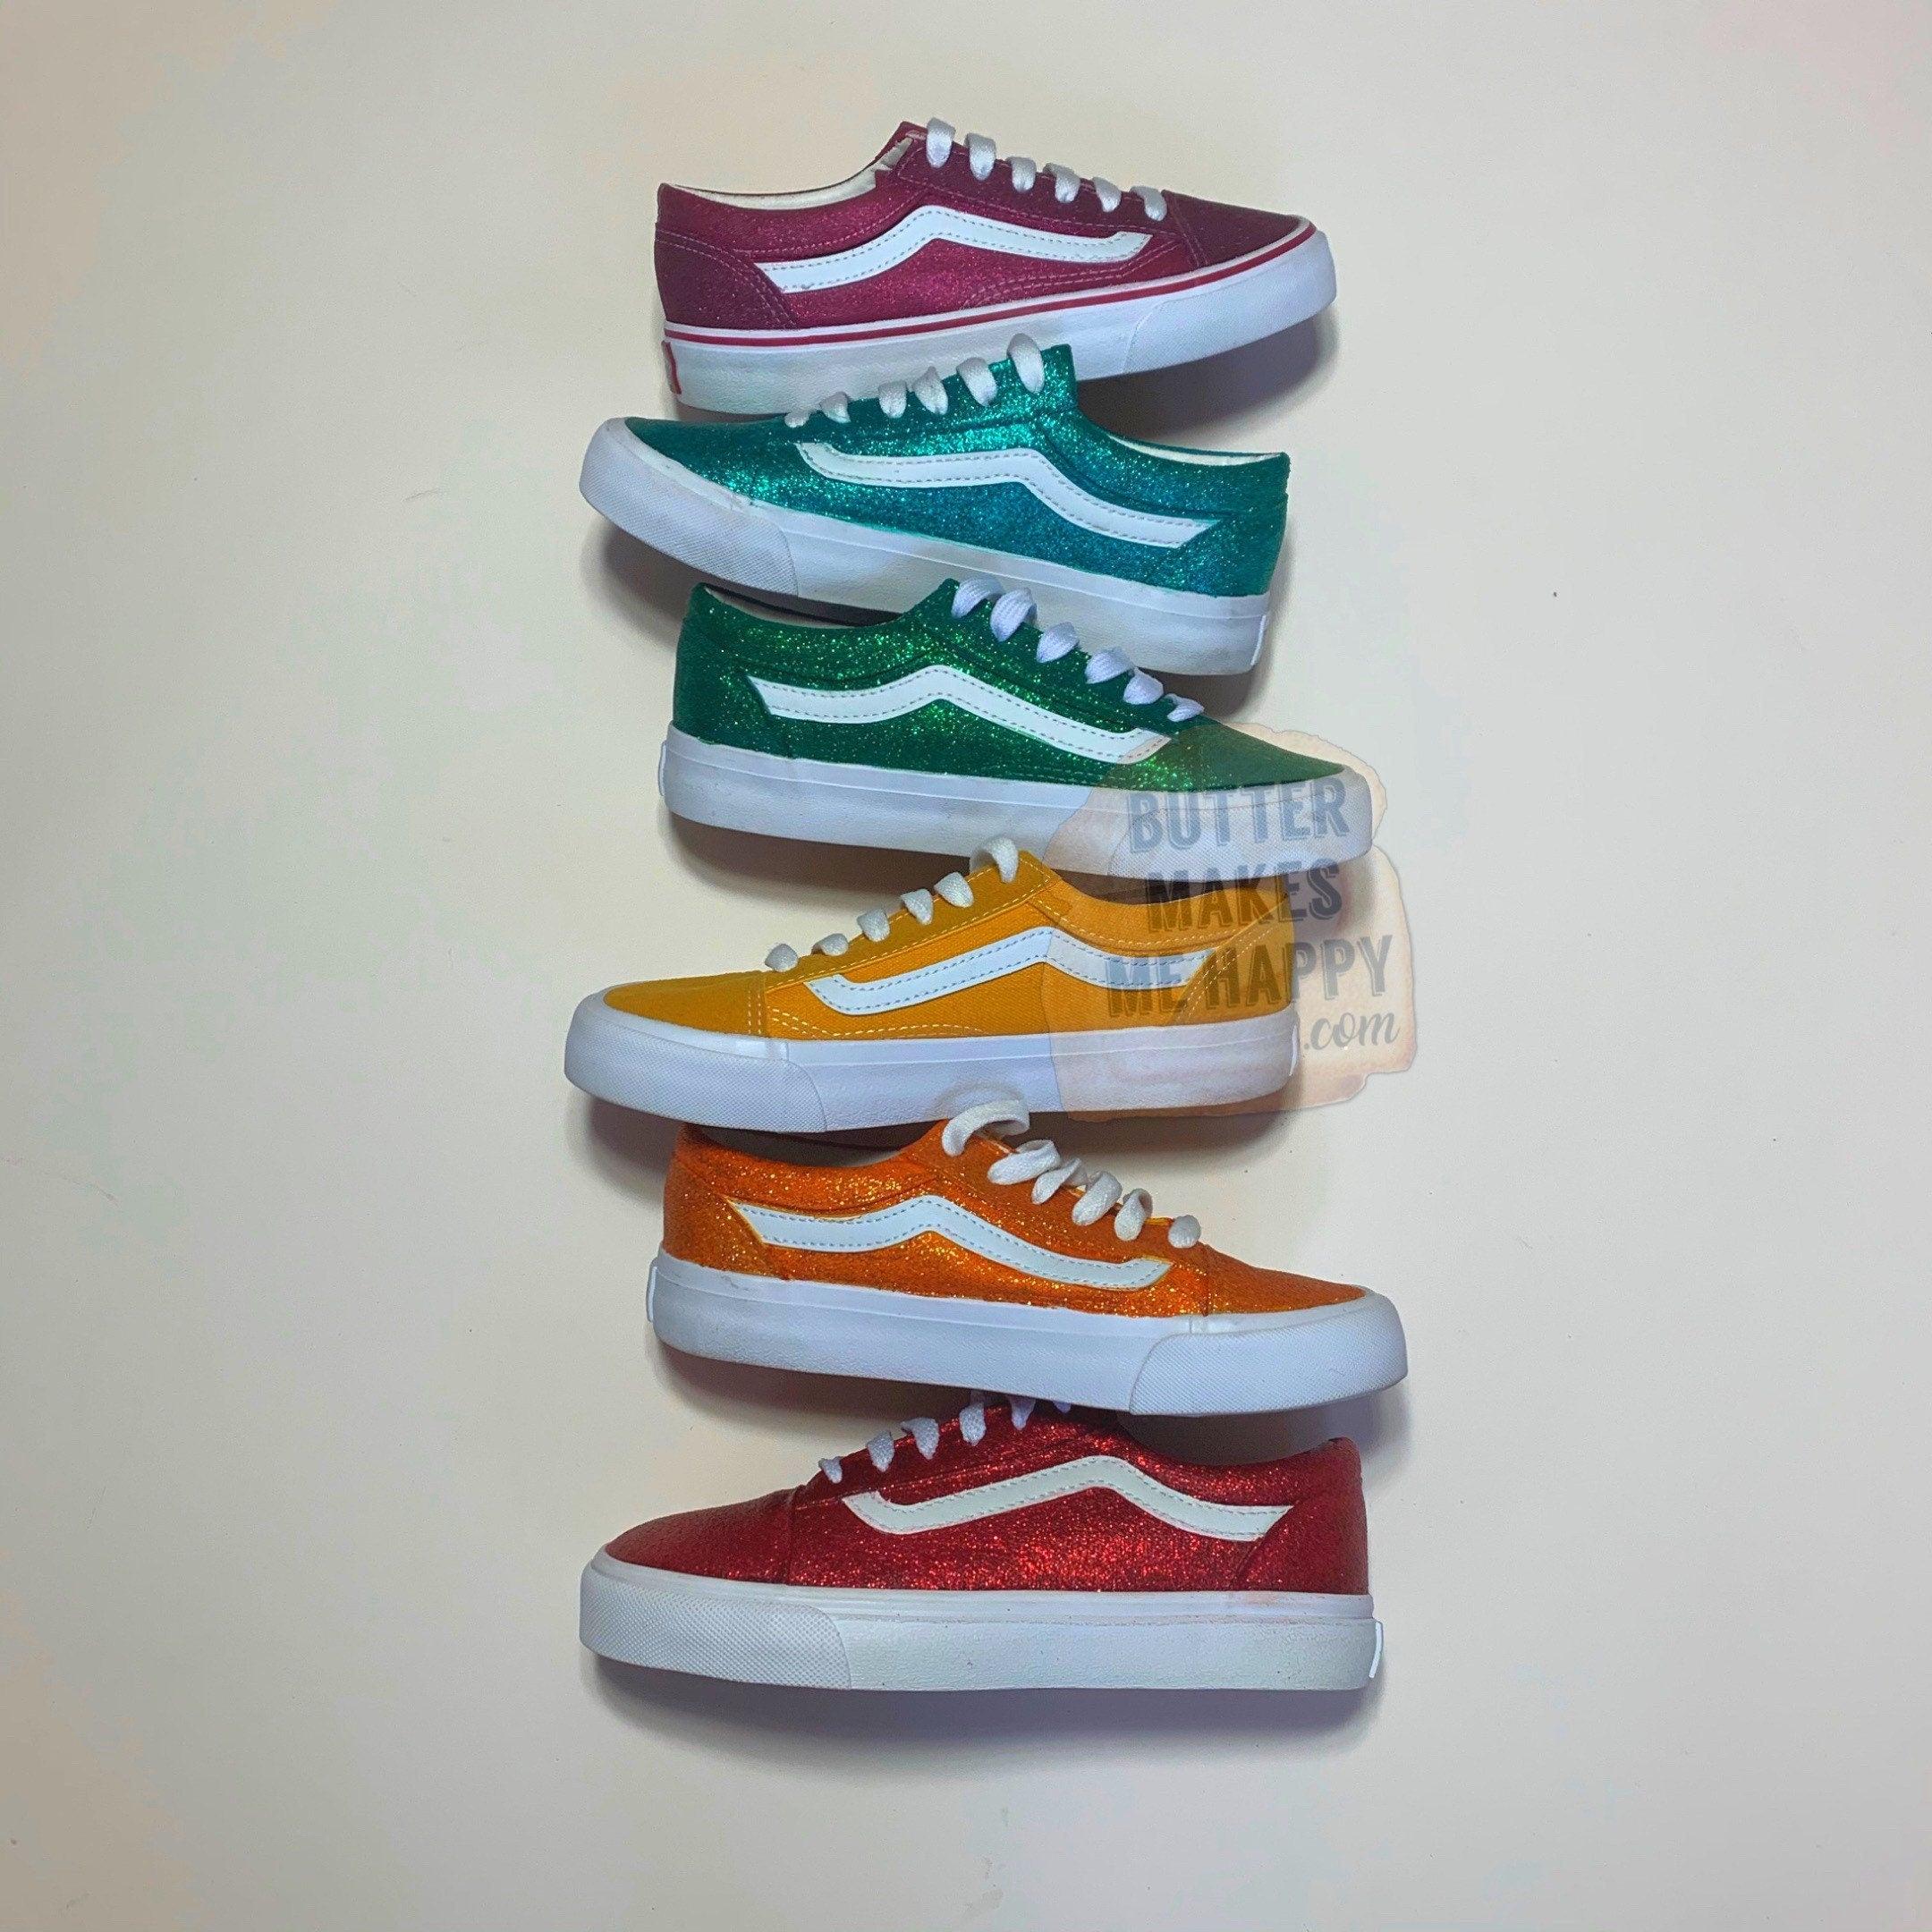 Glitter Sparkly Vans Old - Your Color Skool ButterMakesMeHappy Pick –